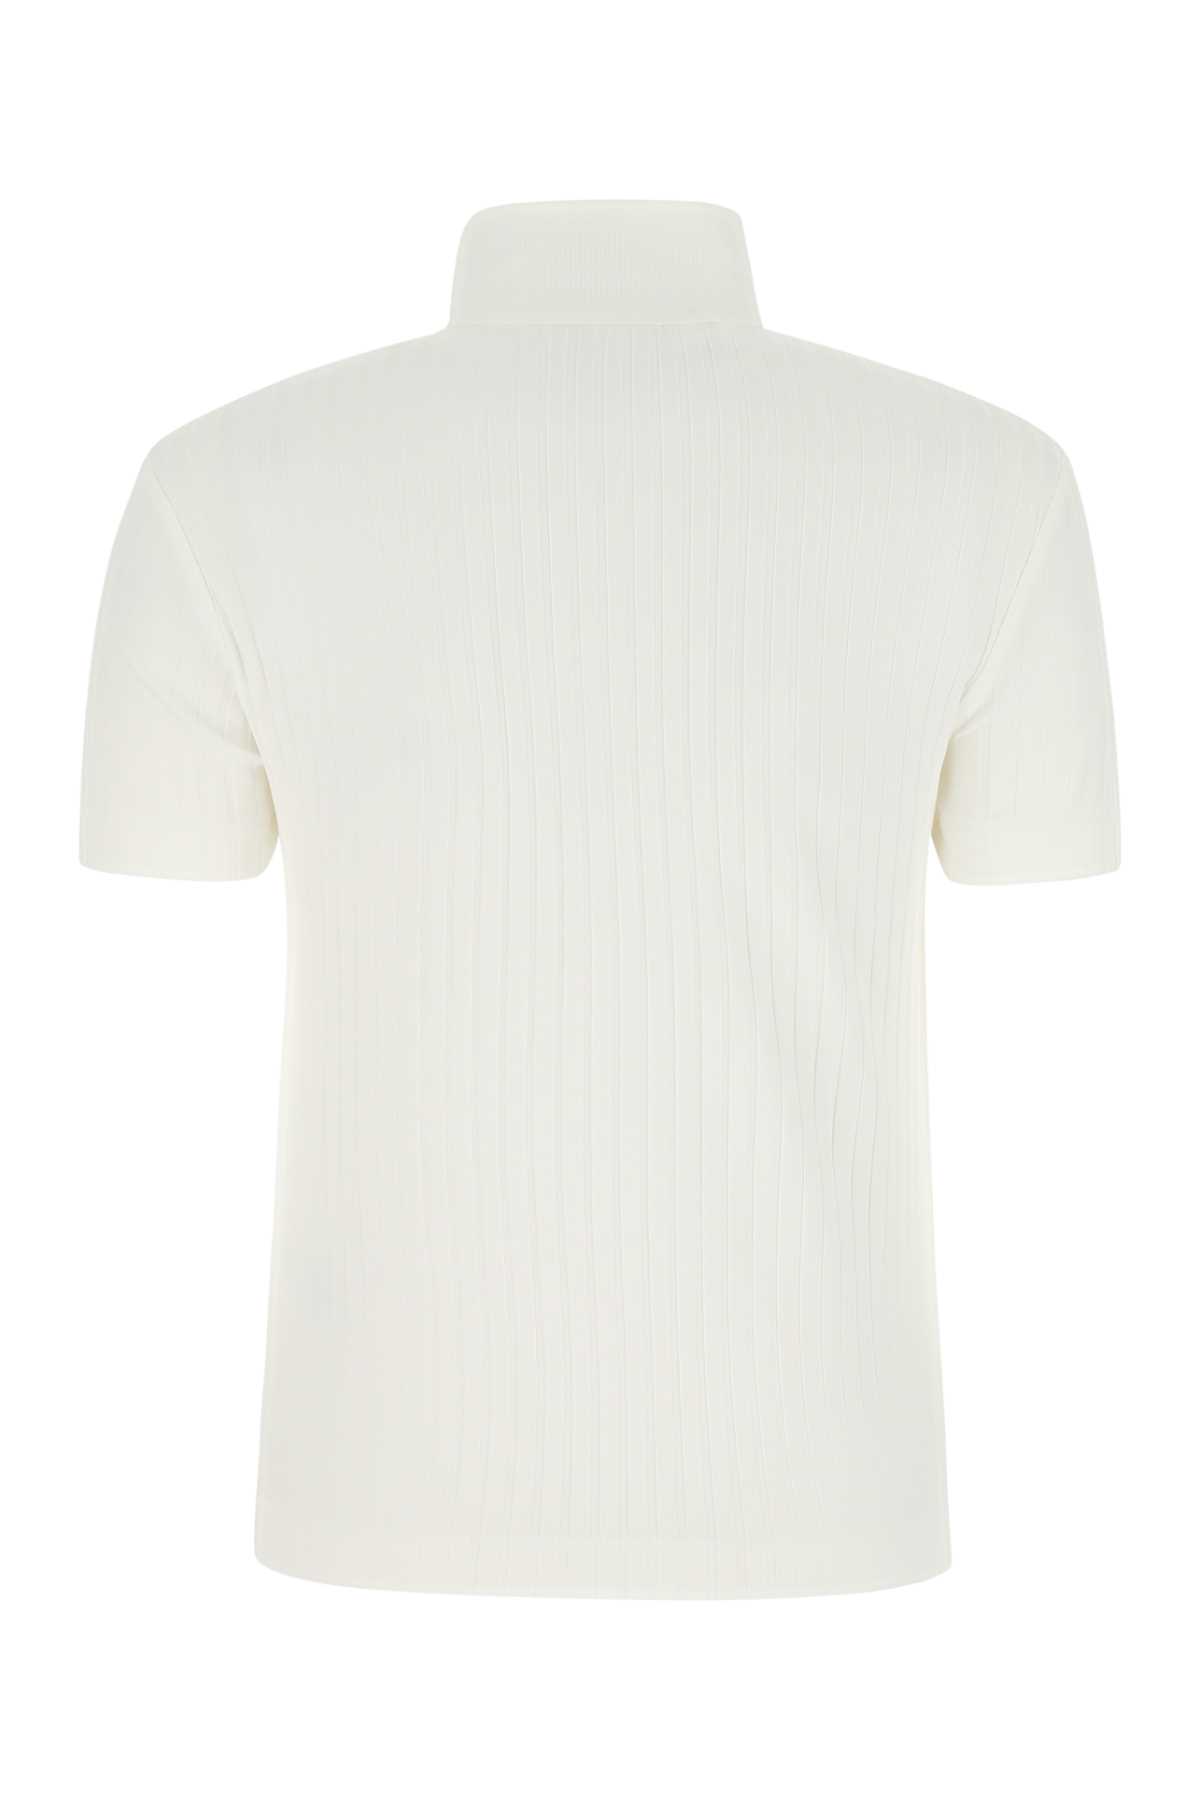 Lacoste White Stretch Viscose Blend Polo Shirt In 70v